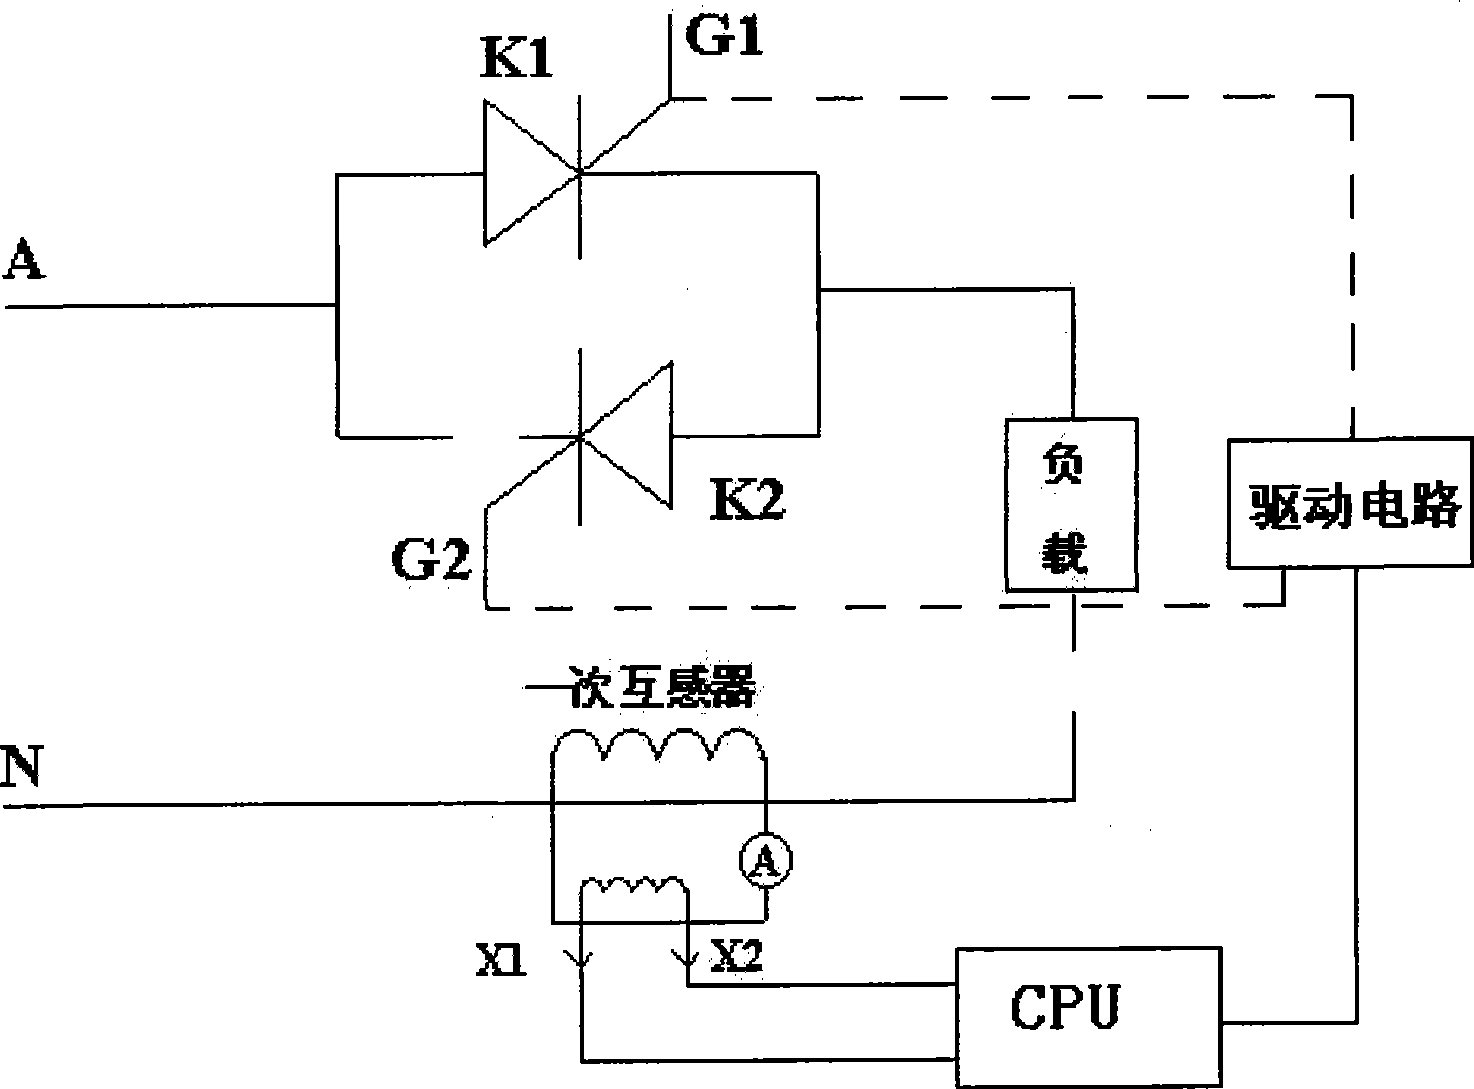 Single-phase earth fault positioning device for electrical power distribution network